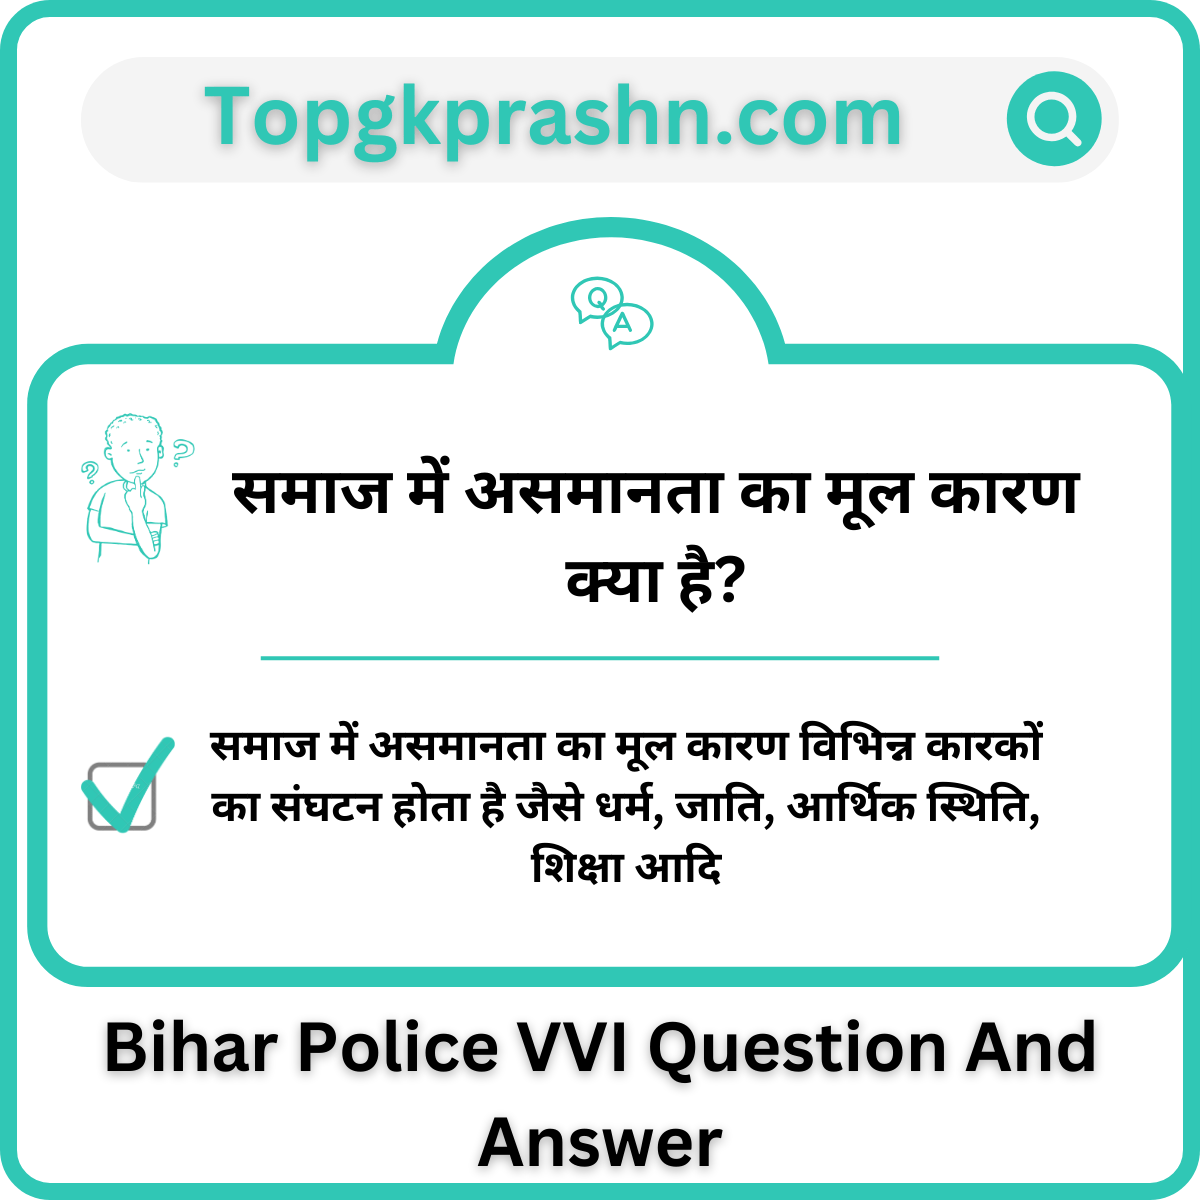 Top 100 gk questions in hindi pdf
